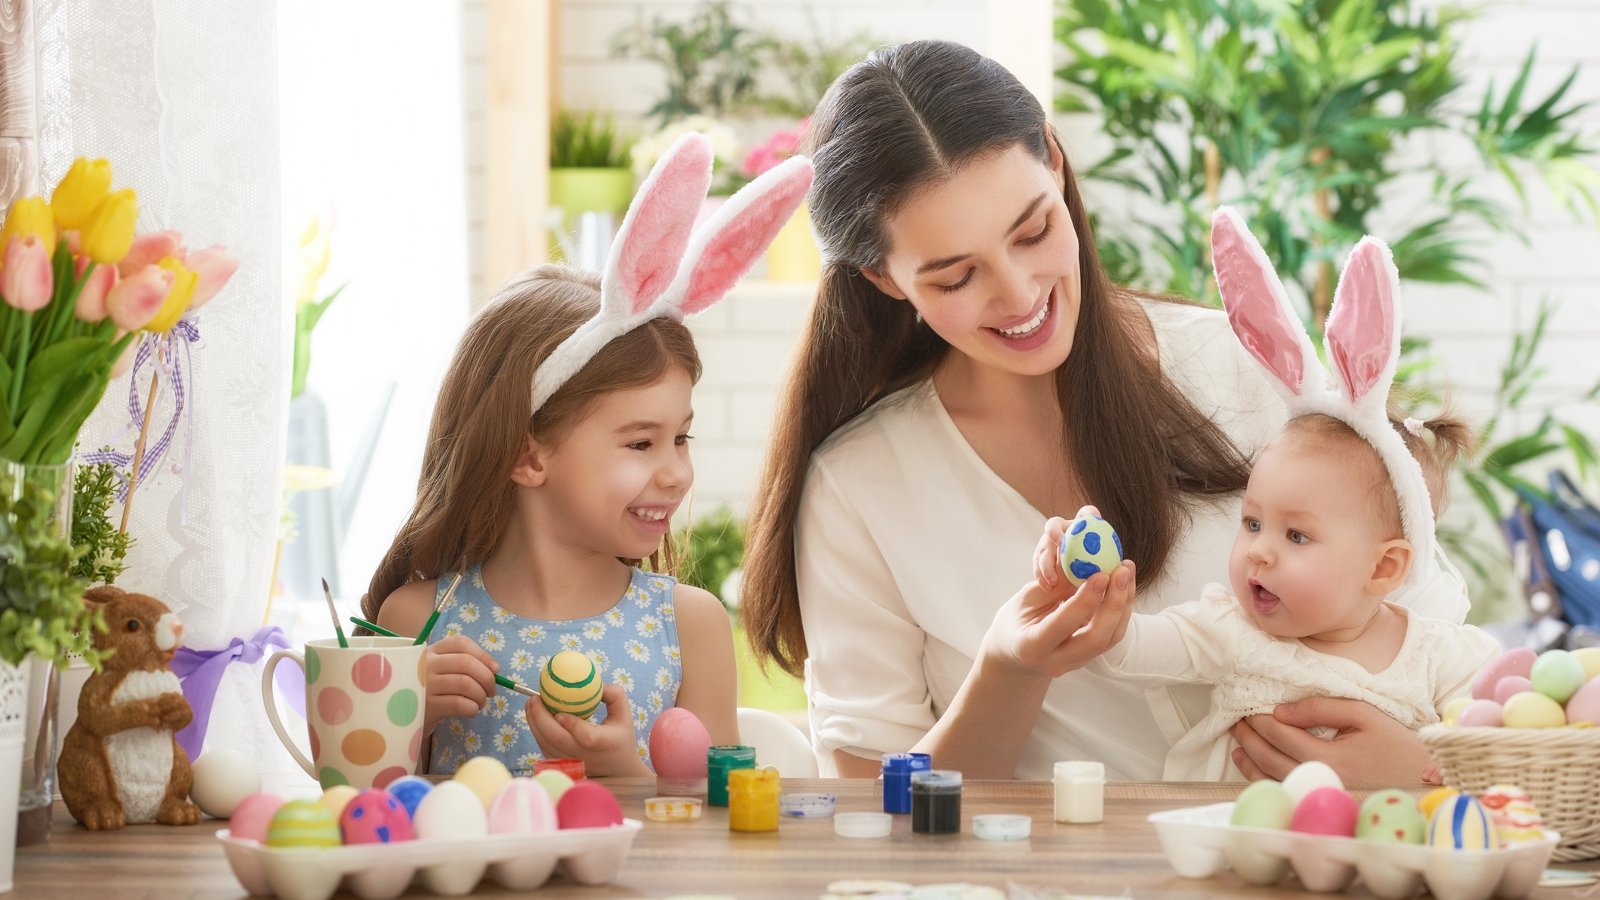 10 Amazing things to do at Easter